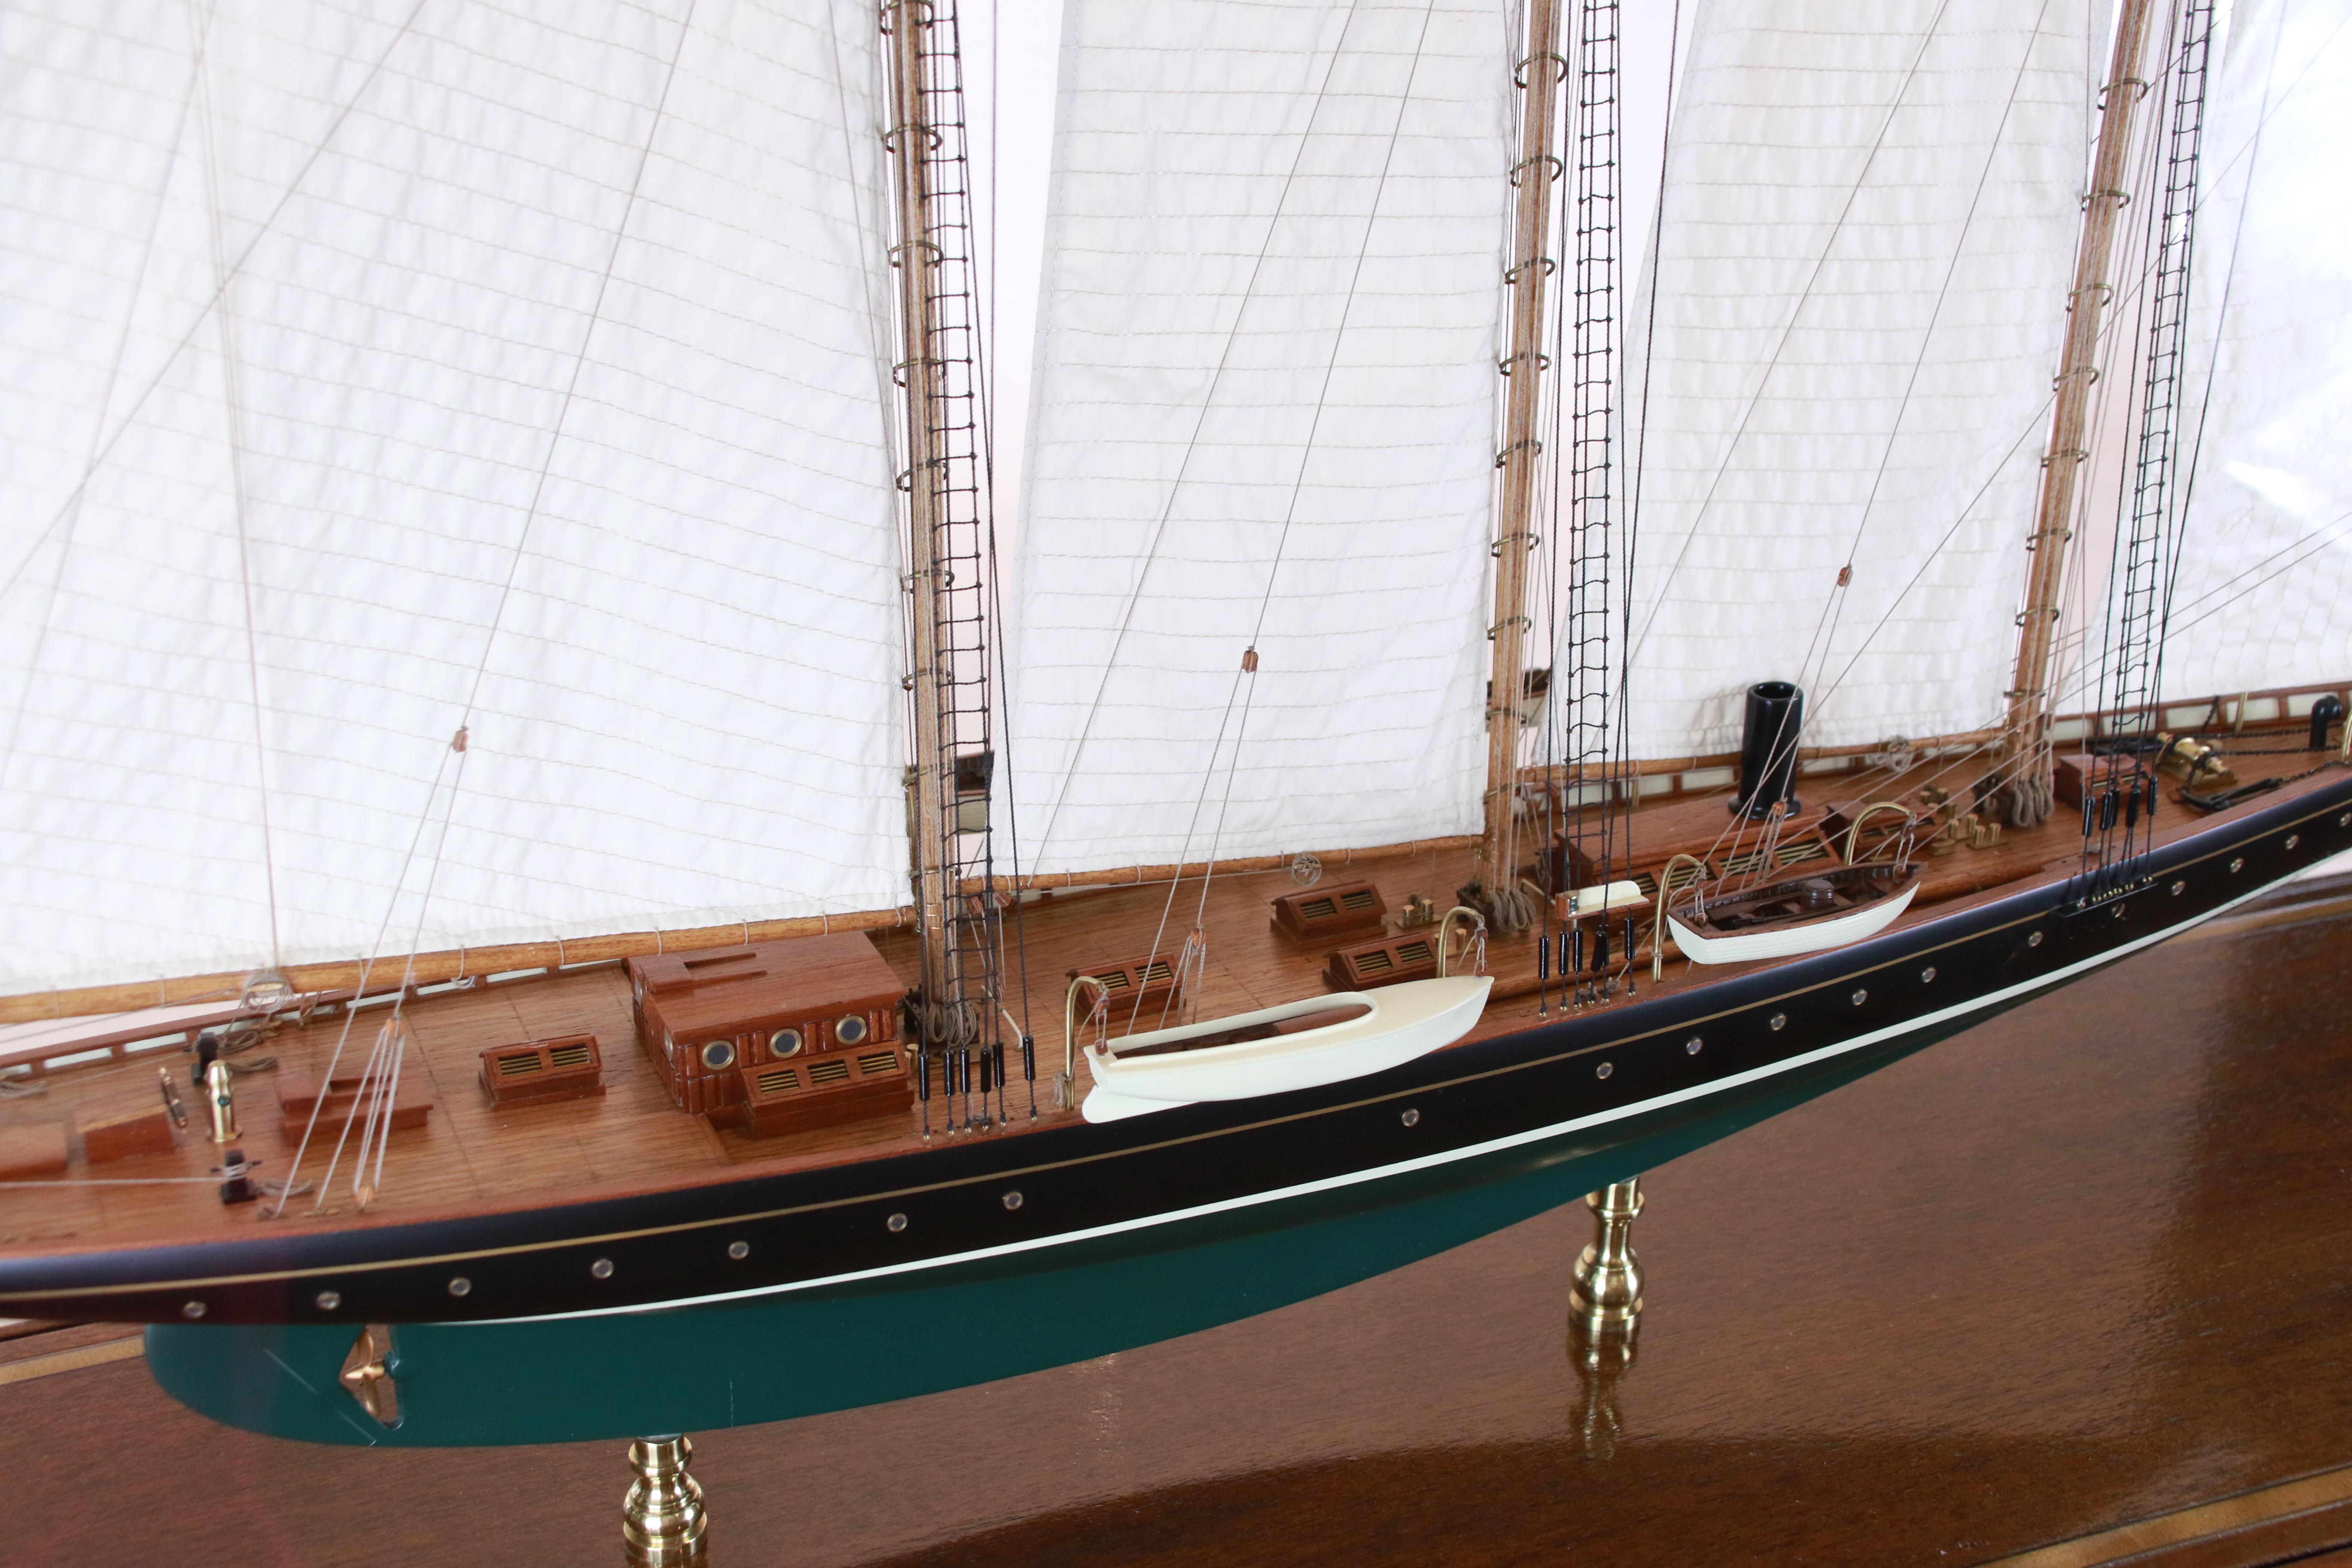 Model of the schooner Atlantic, winner of the Kaiser Cup where she set the speed record for the fastest transatlantic passage in 1905; unbroken for nearly 100 years! 
Highly detailed with lifeboats hanging from davits, raised cabins, doors,